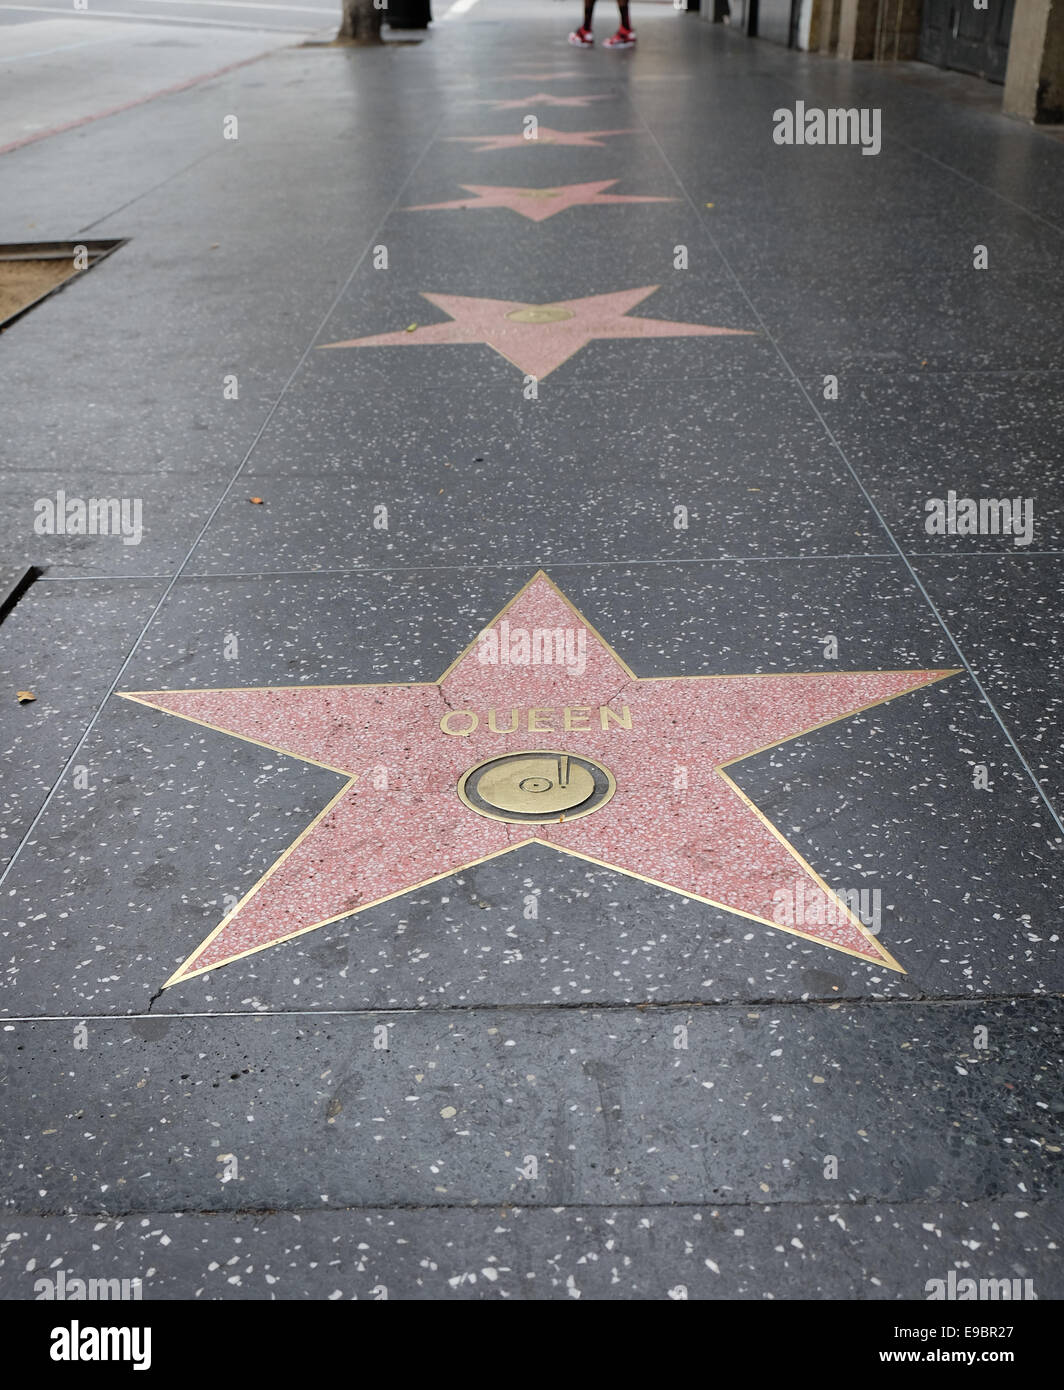 Queen-Rockgruppe Stern auf Hollywoods Walk of Fame Stockfoto